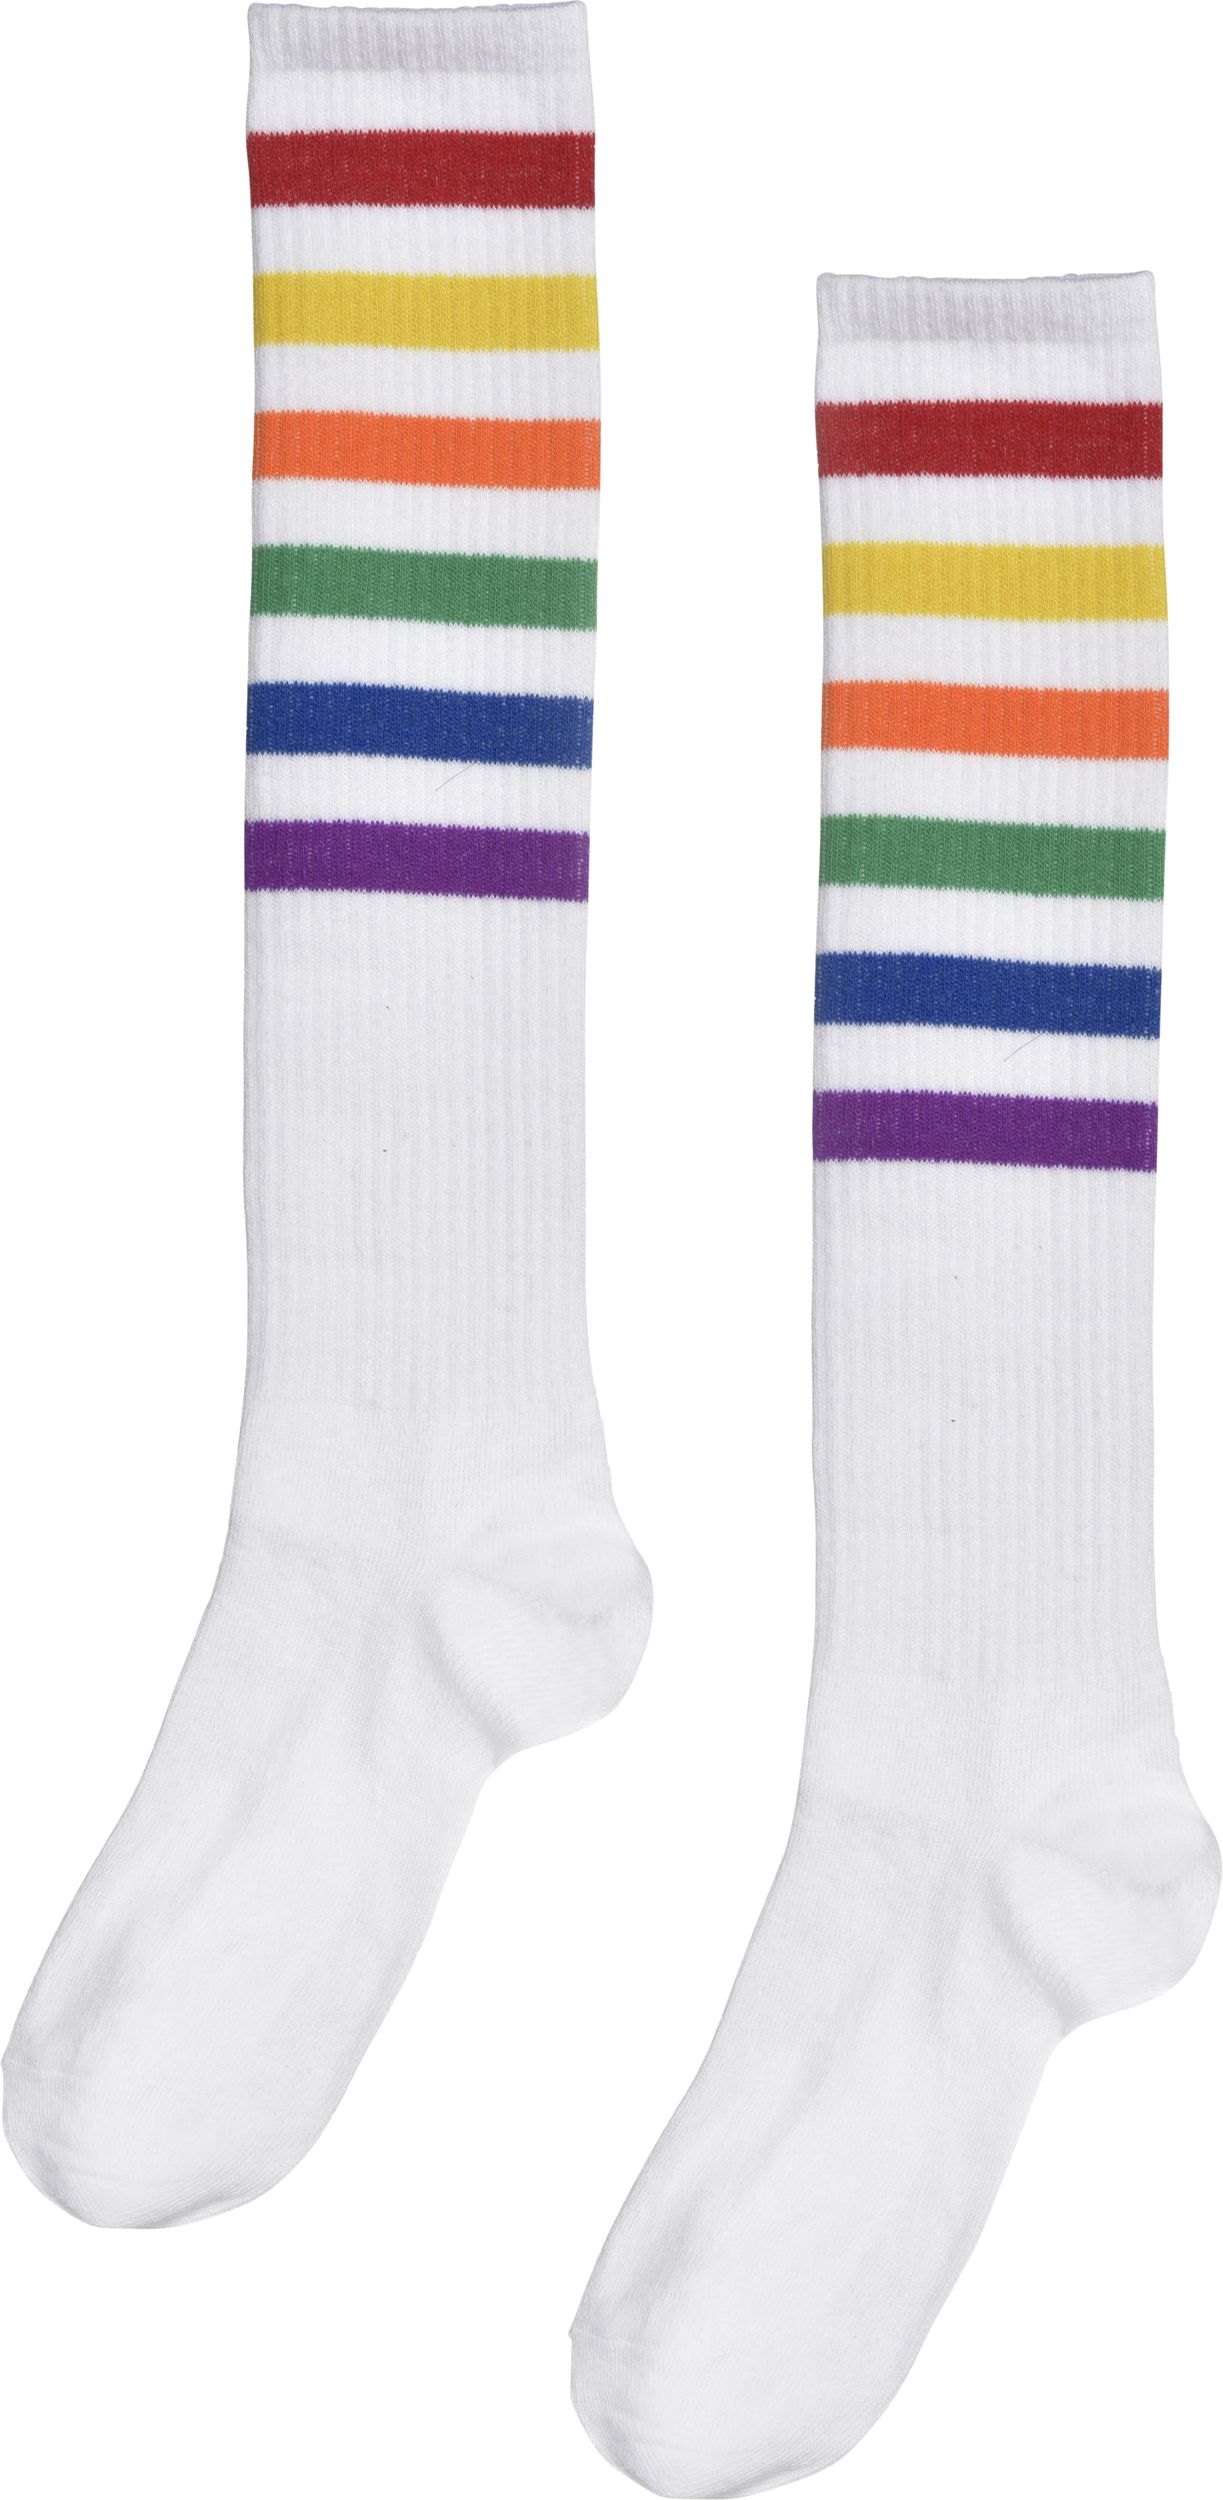 Adult Knee High Socks, White/Rainbow, One Size, Wearable Accessory for Pride